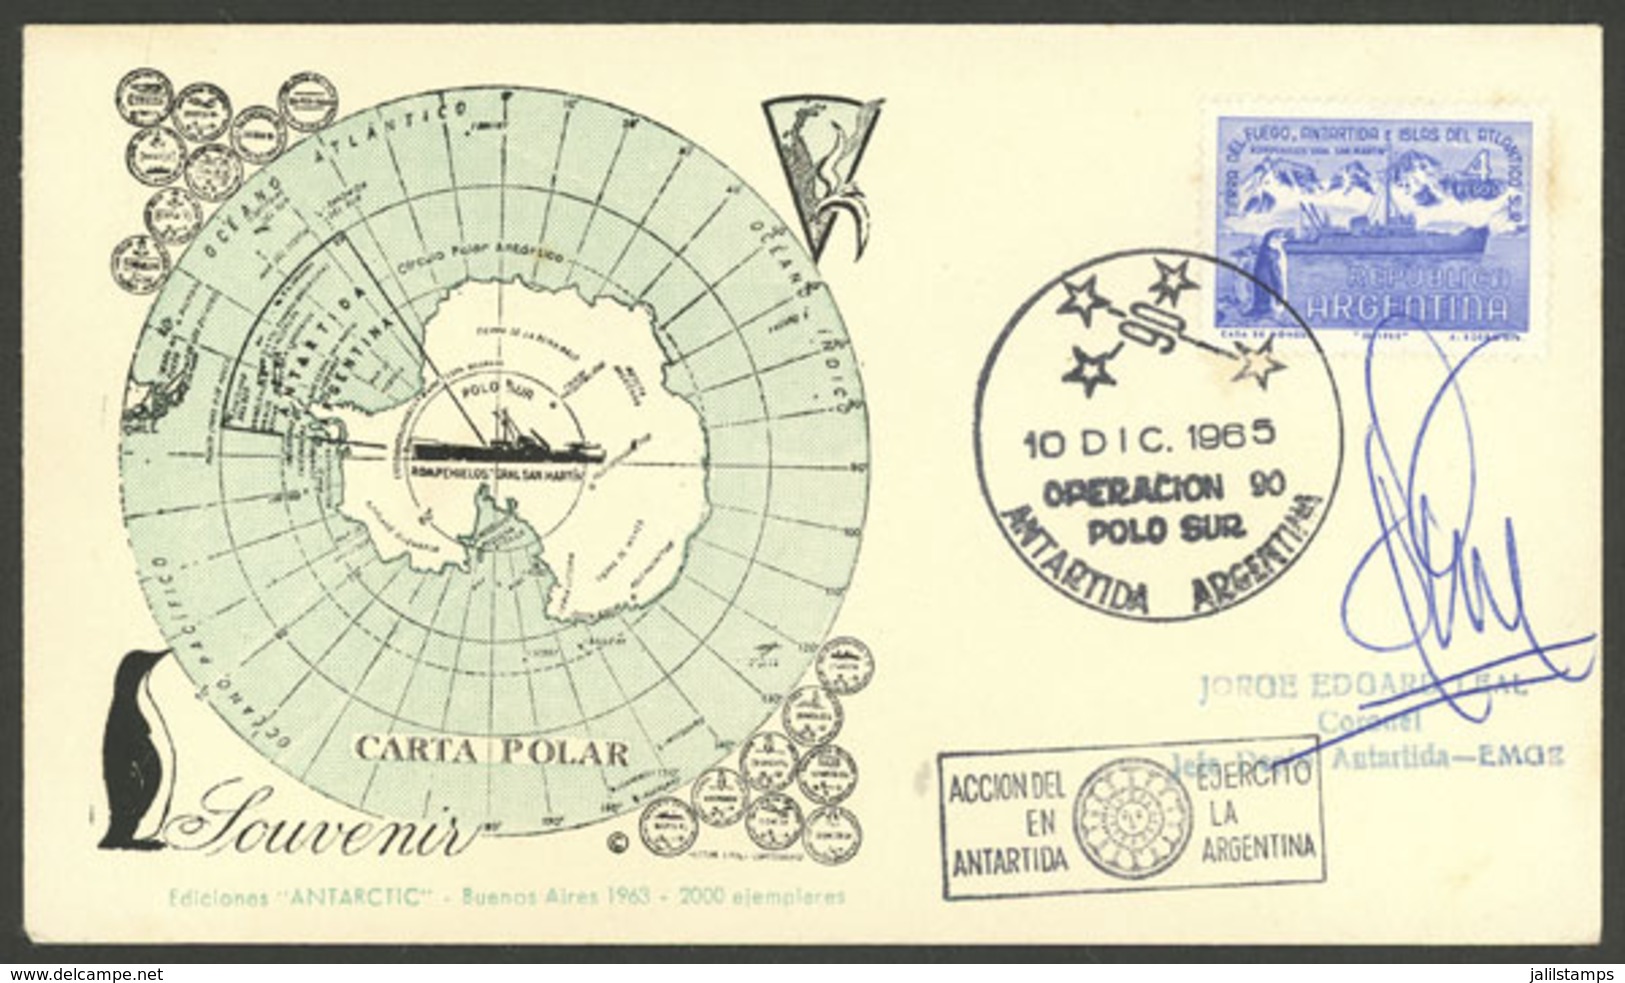 ARGENTINE ANTARCTICA: Cover Commemorating The "Operación 90" Expedition To The South Pole, Signed By Cnel. Jorge Leal, C - Briefe U. Dokumente